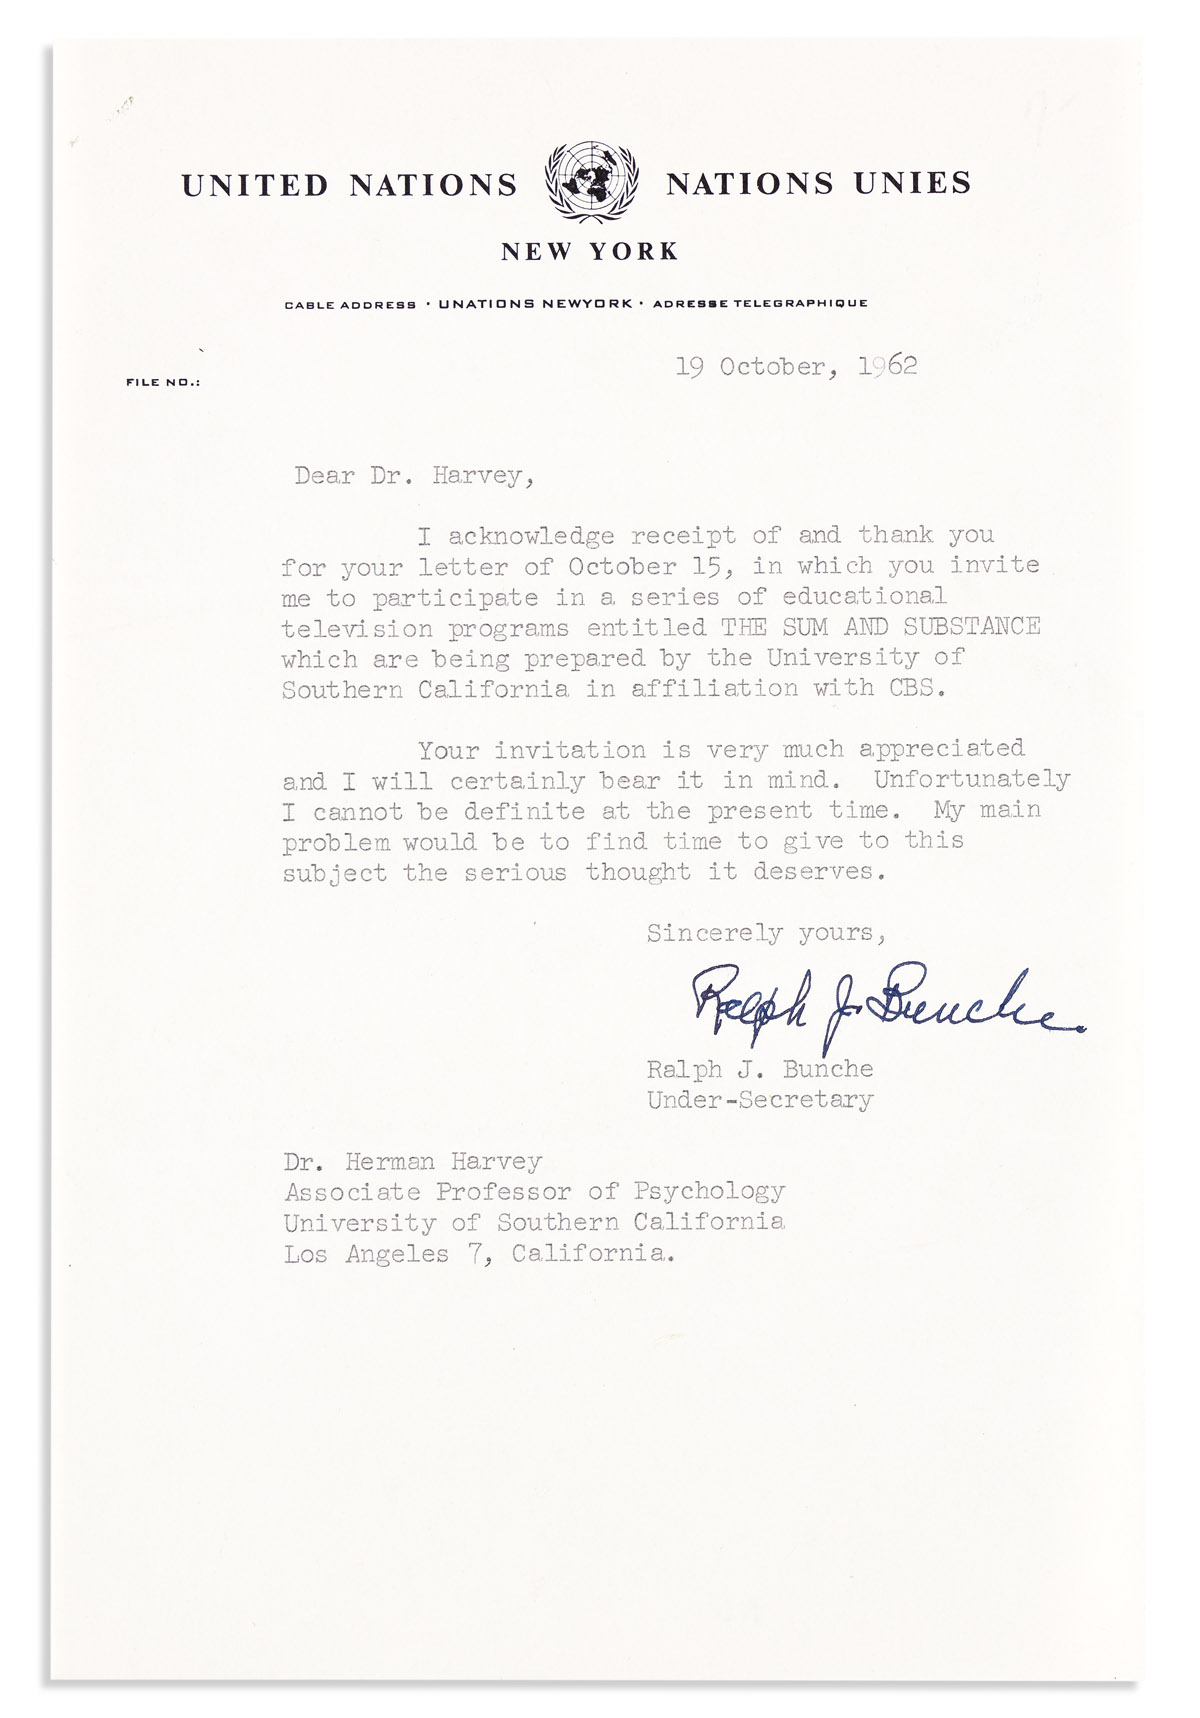 (CIVIL RIGHTS.) BUNCHE, RALPH. Typed Letter Signed, Ralph J. Bunche, to Herman Harvey,